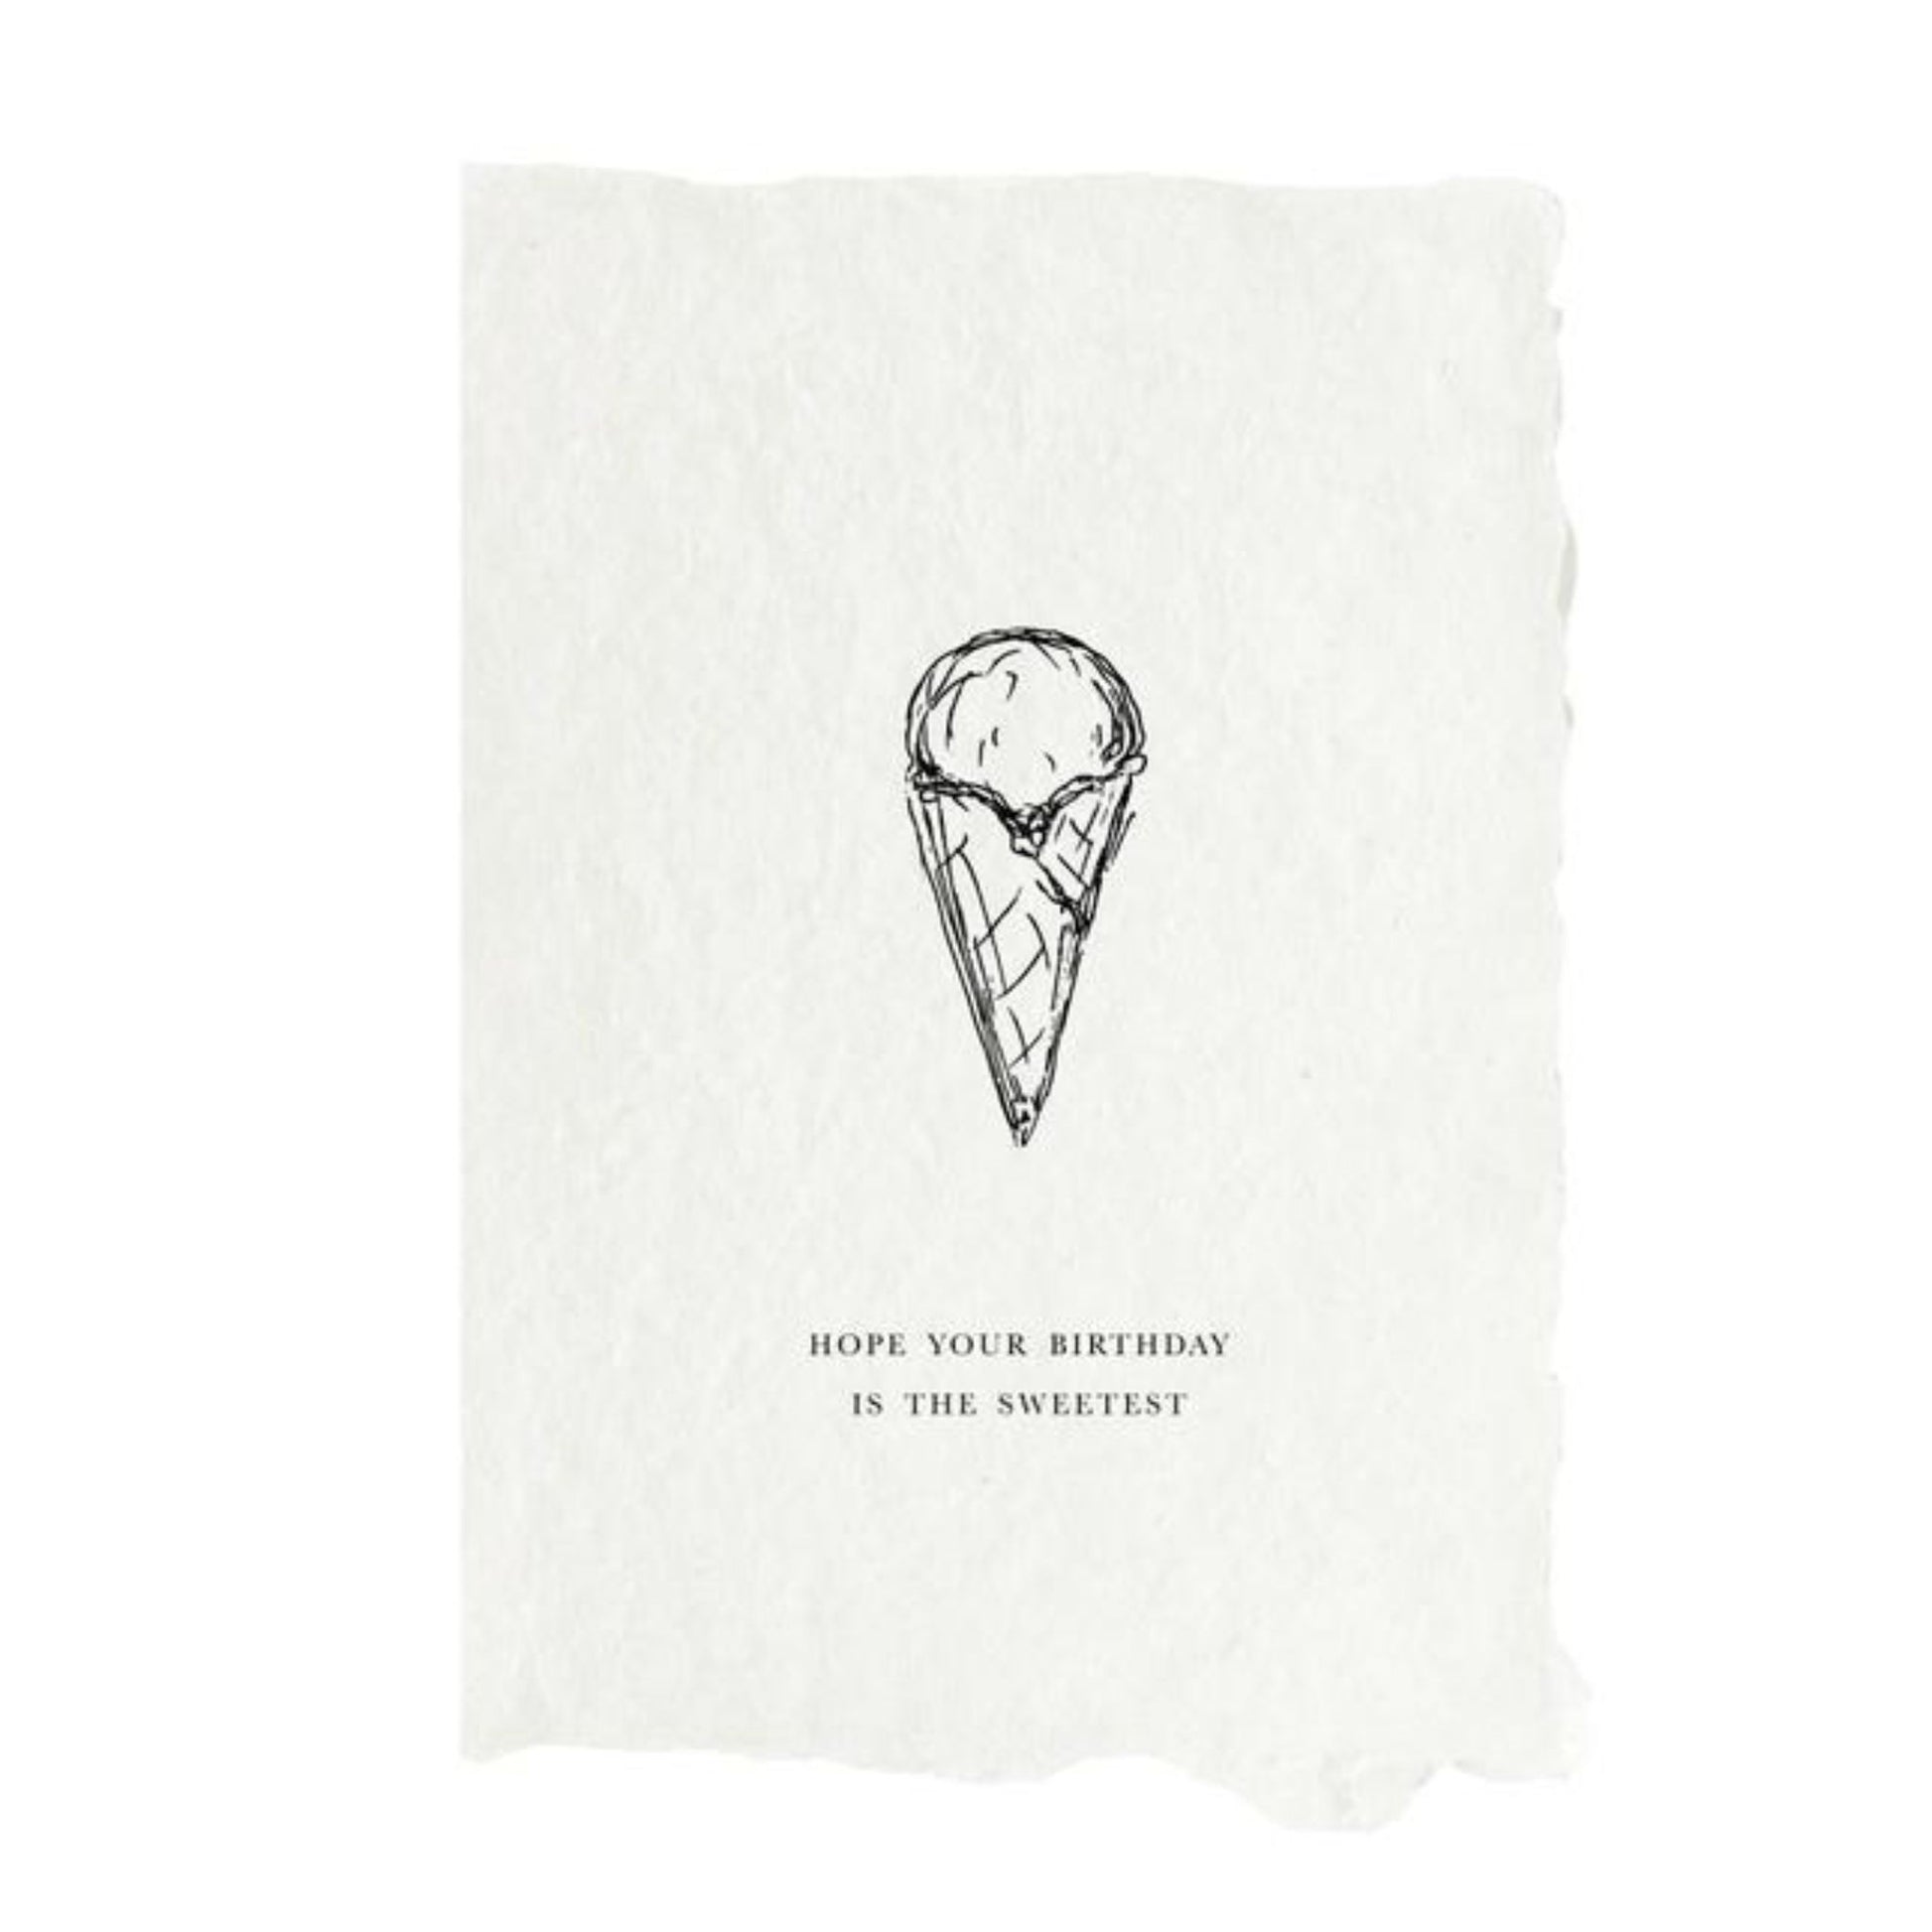 Handmade Card with an icecream cone and a text underneath that says "hope your birthday is the sweetest"